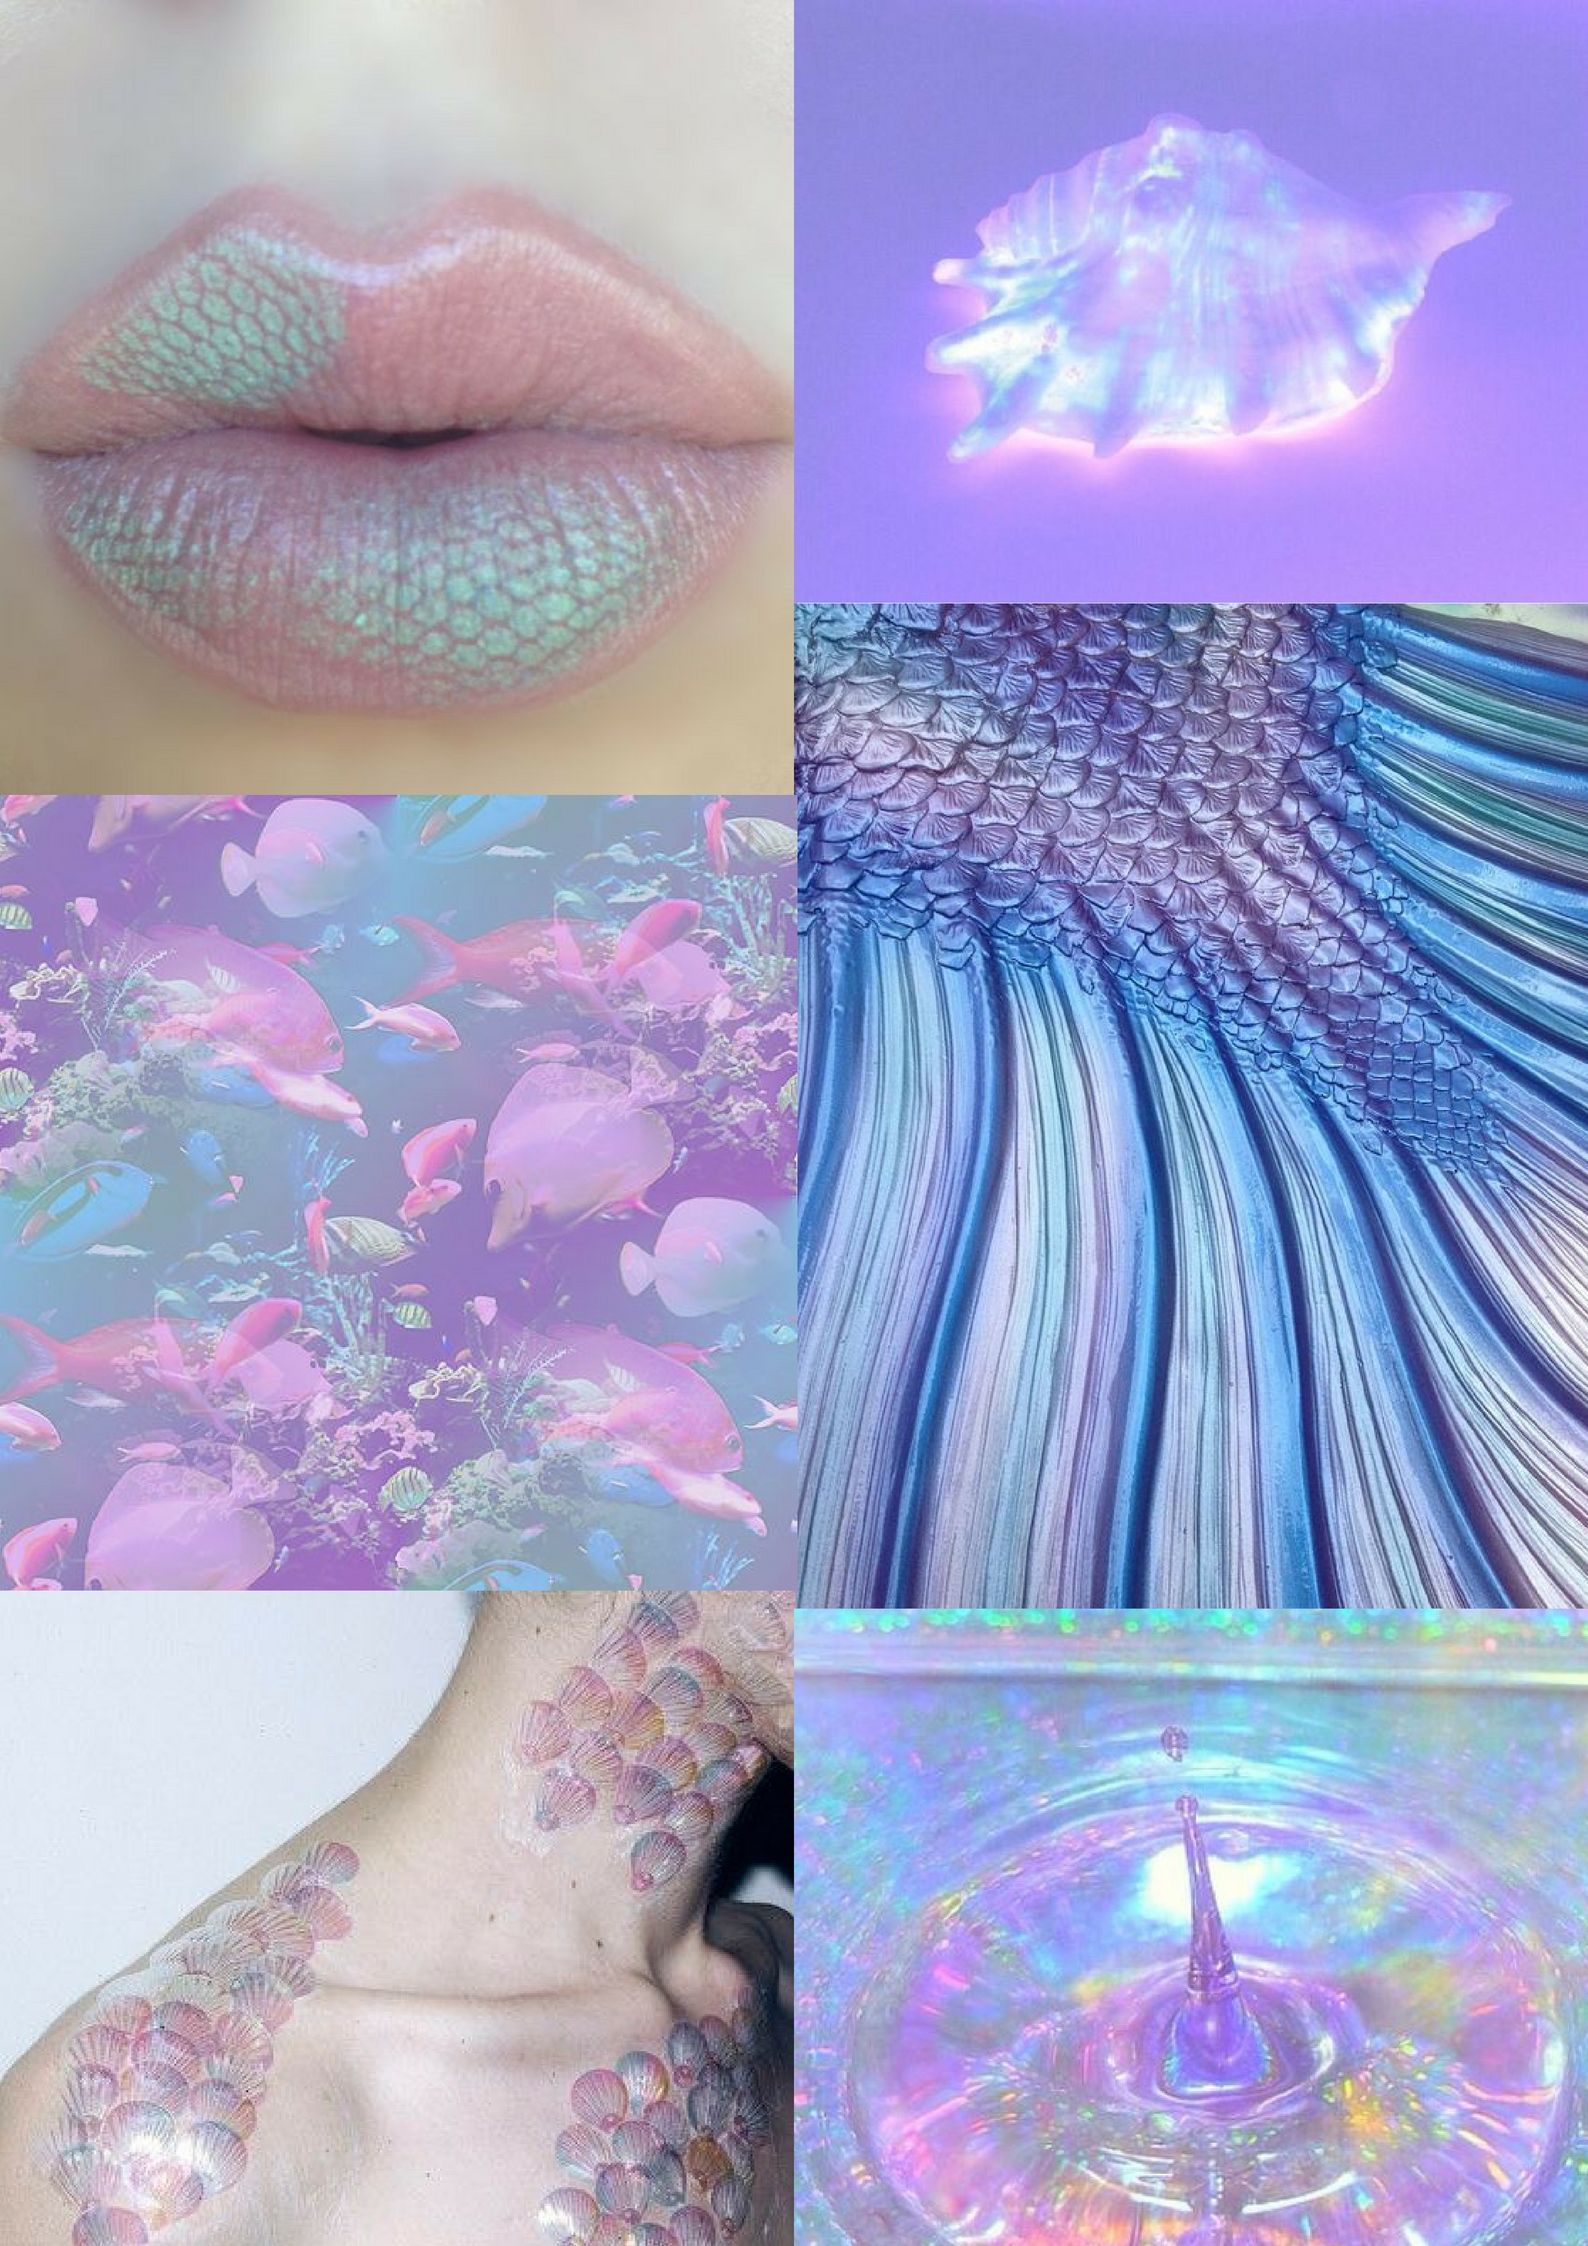 Aesthetic collage of mermaid images including lips, shells, and scales - Mermaid